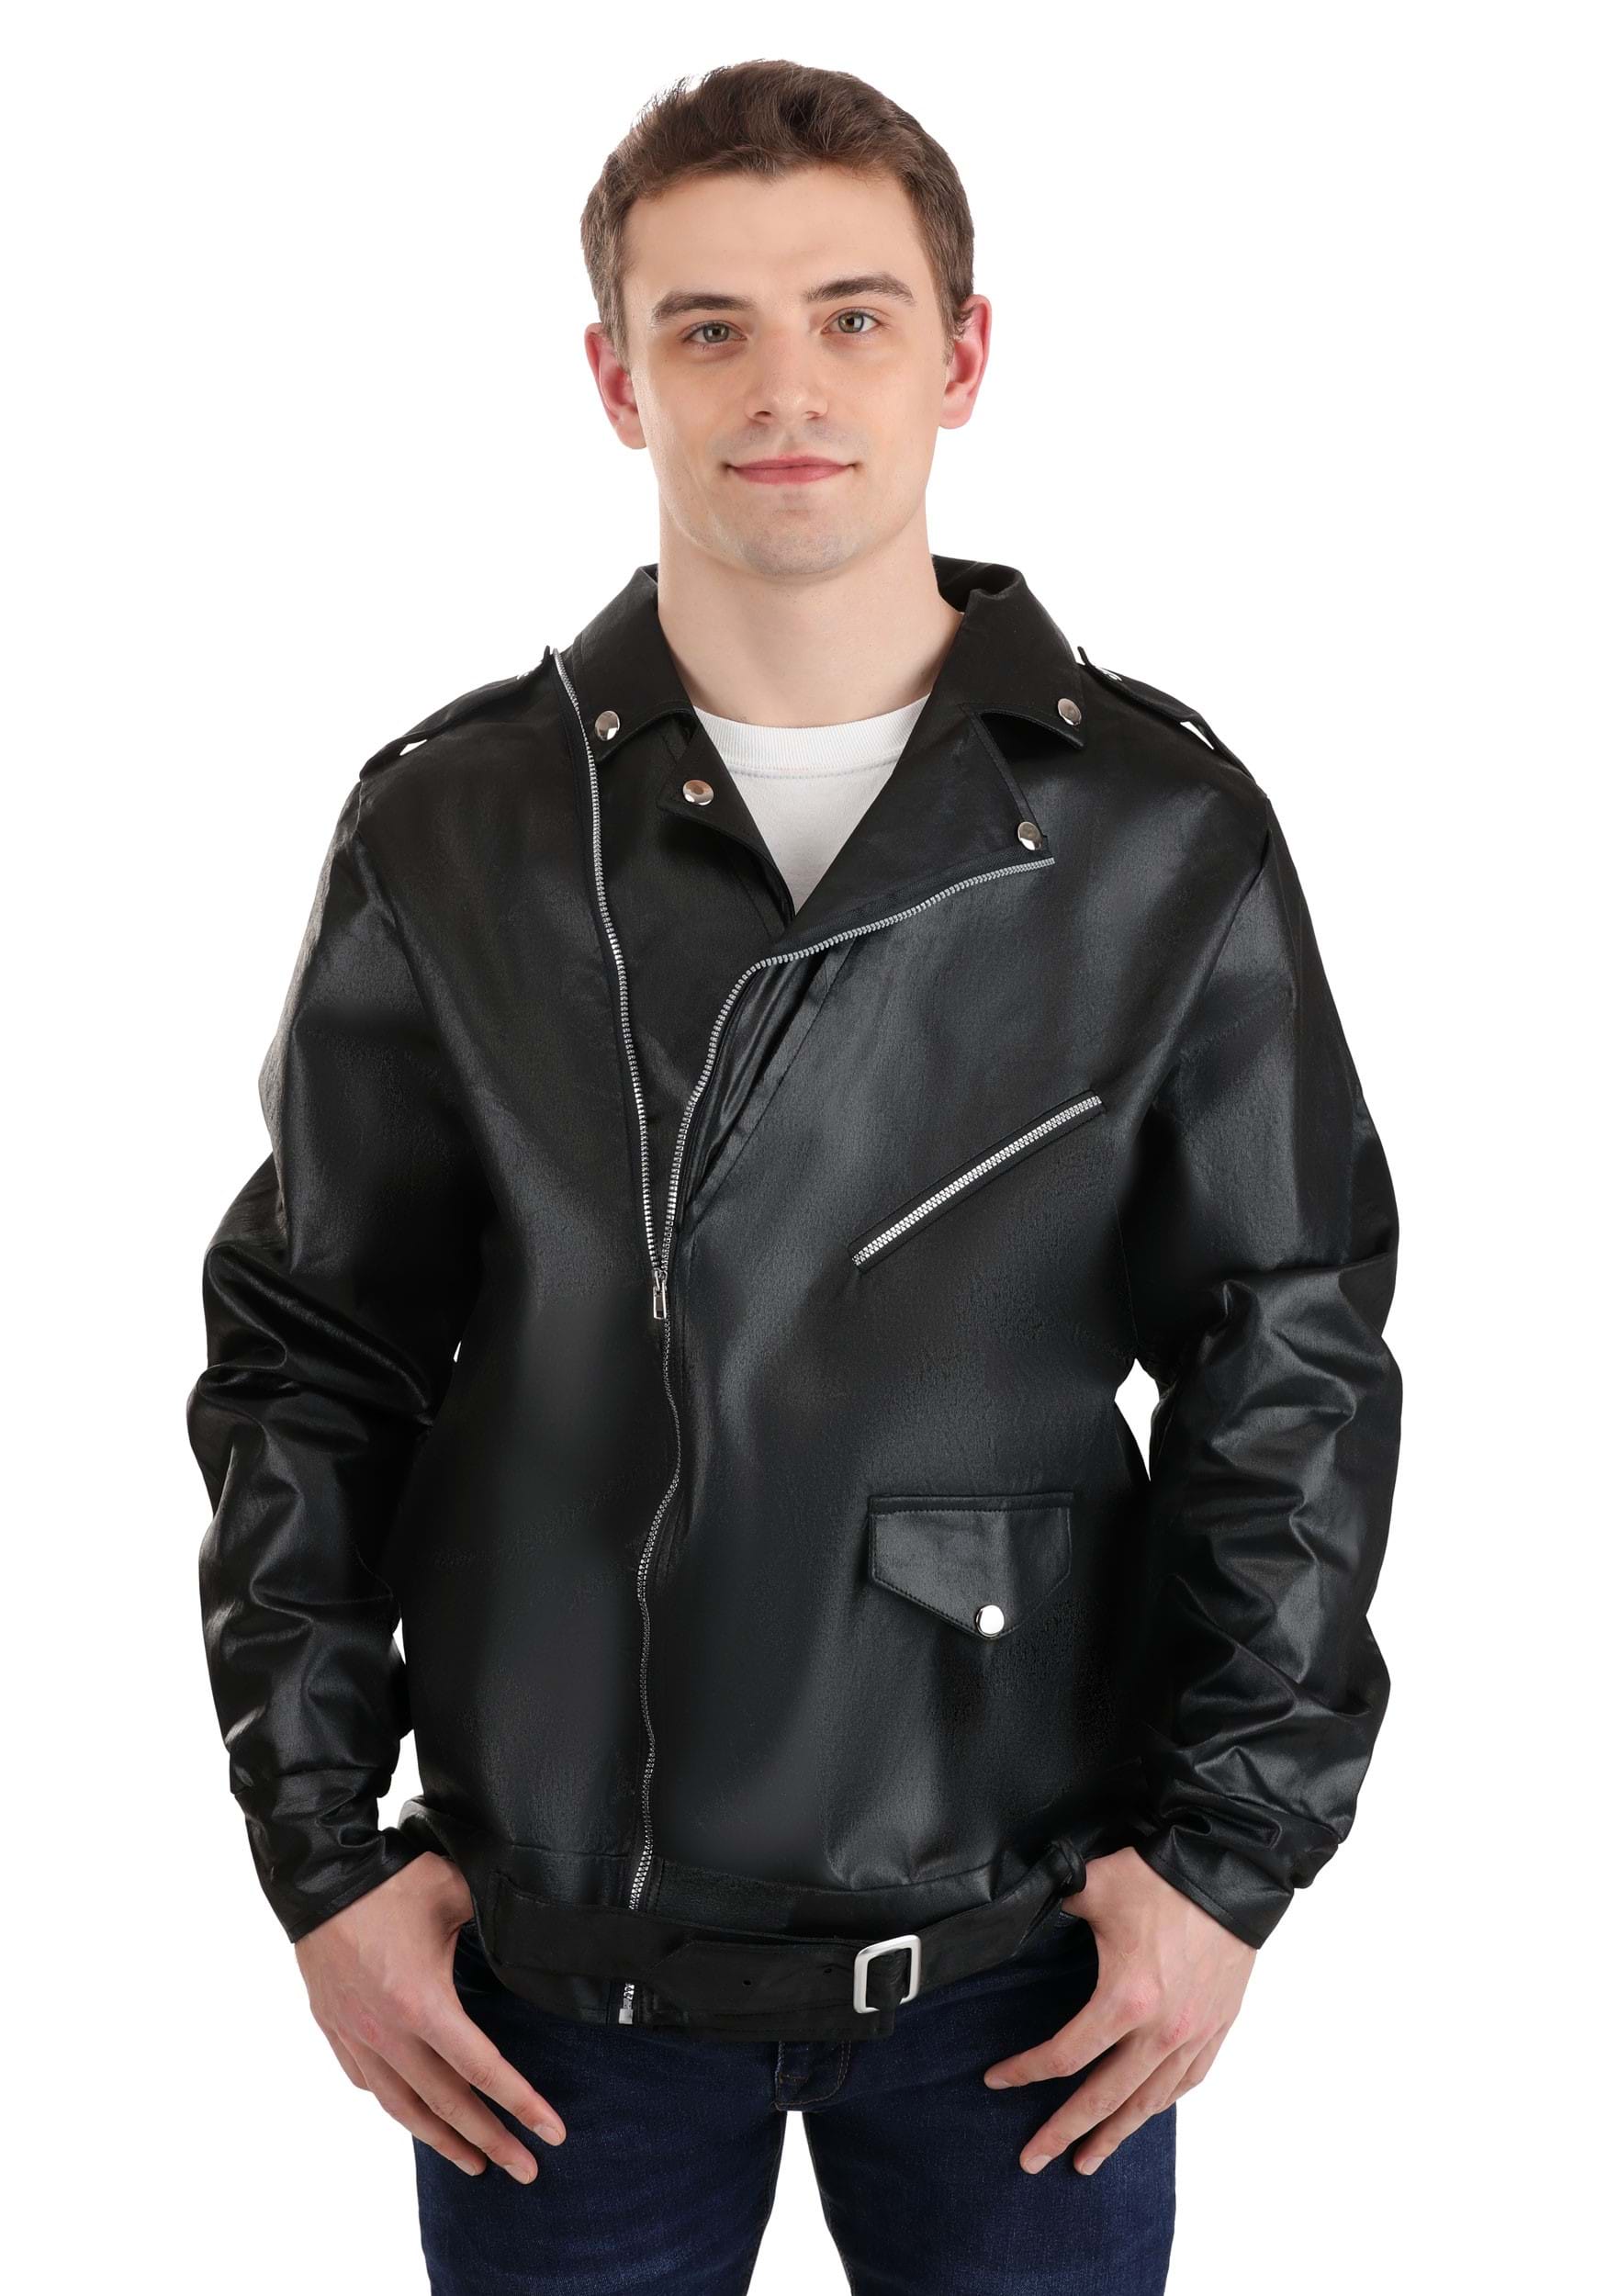 Image of Adult Grease Jacket for Men ID FUN4033AD-4X